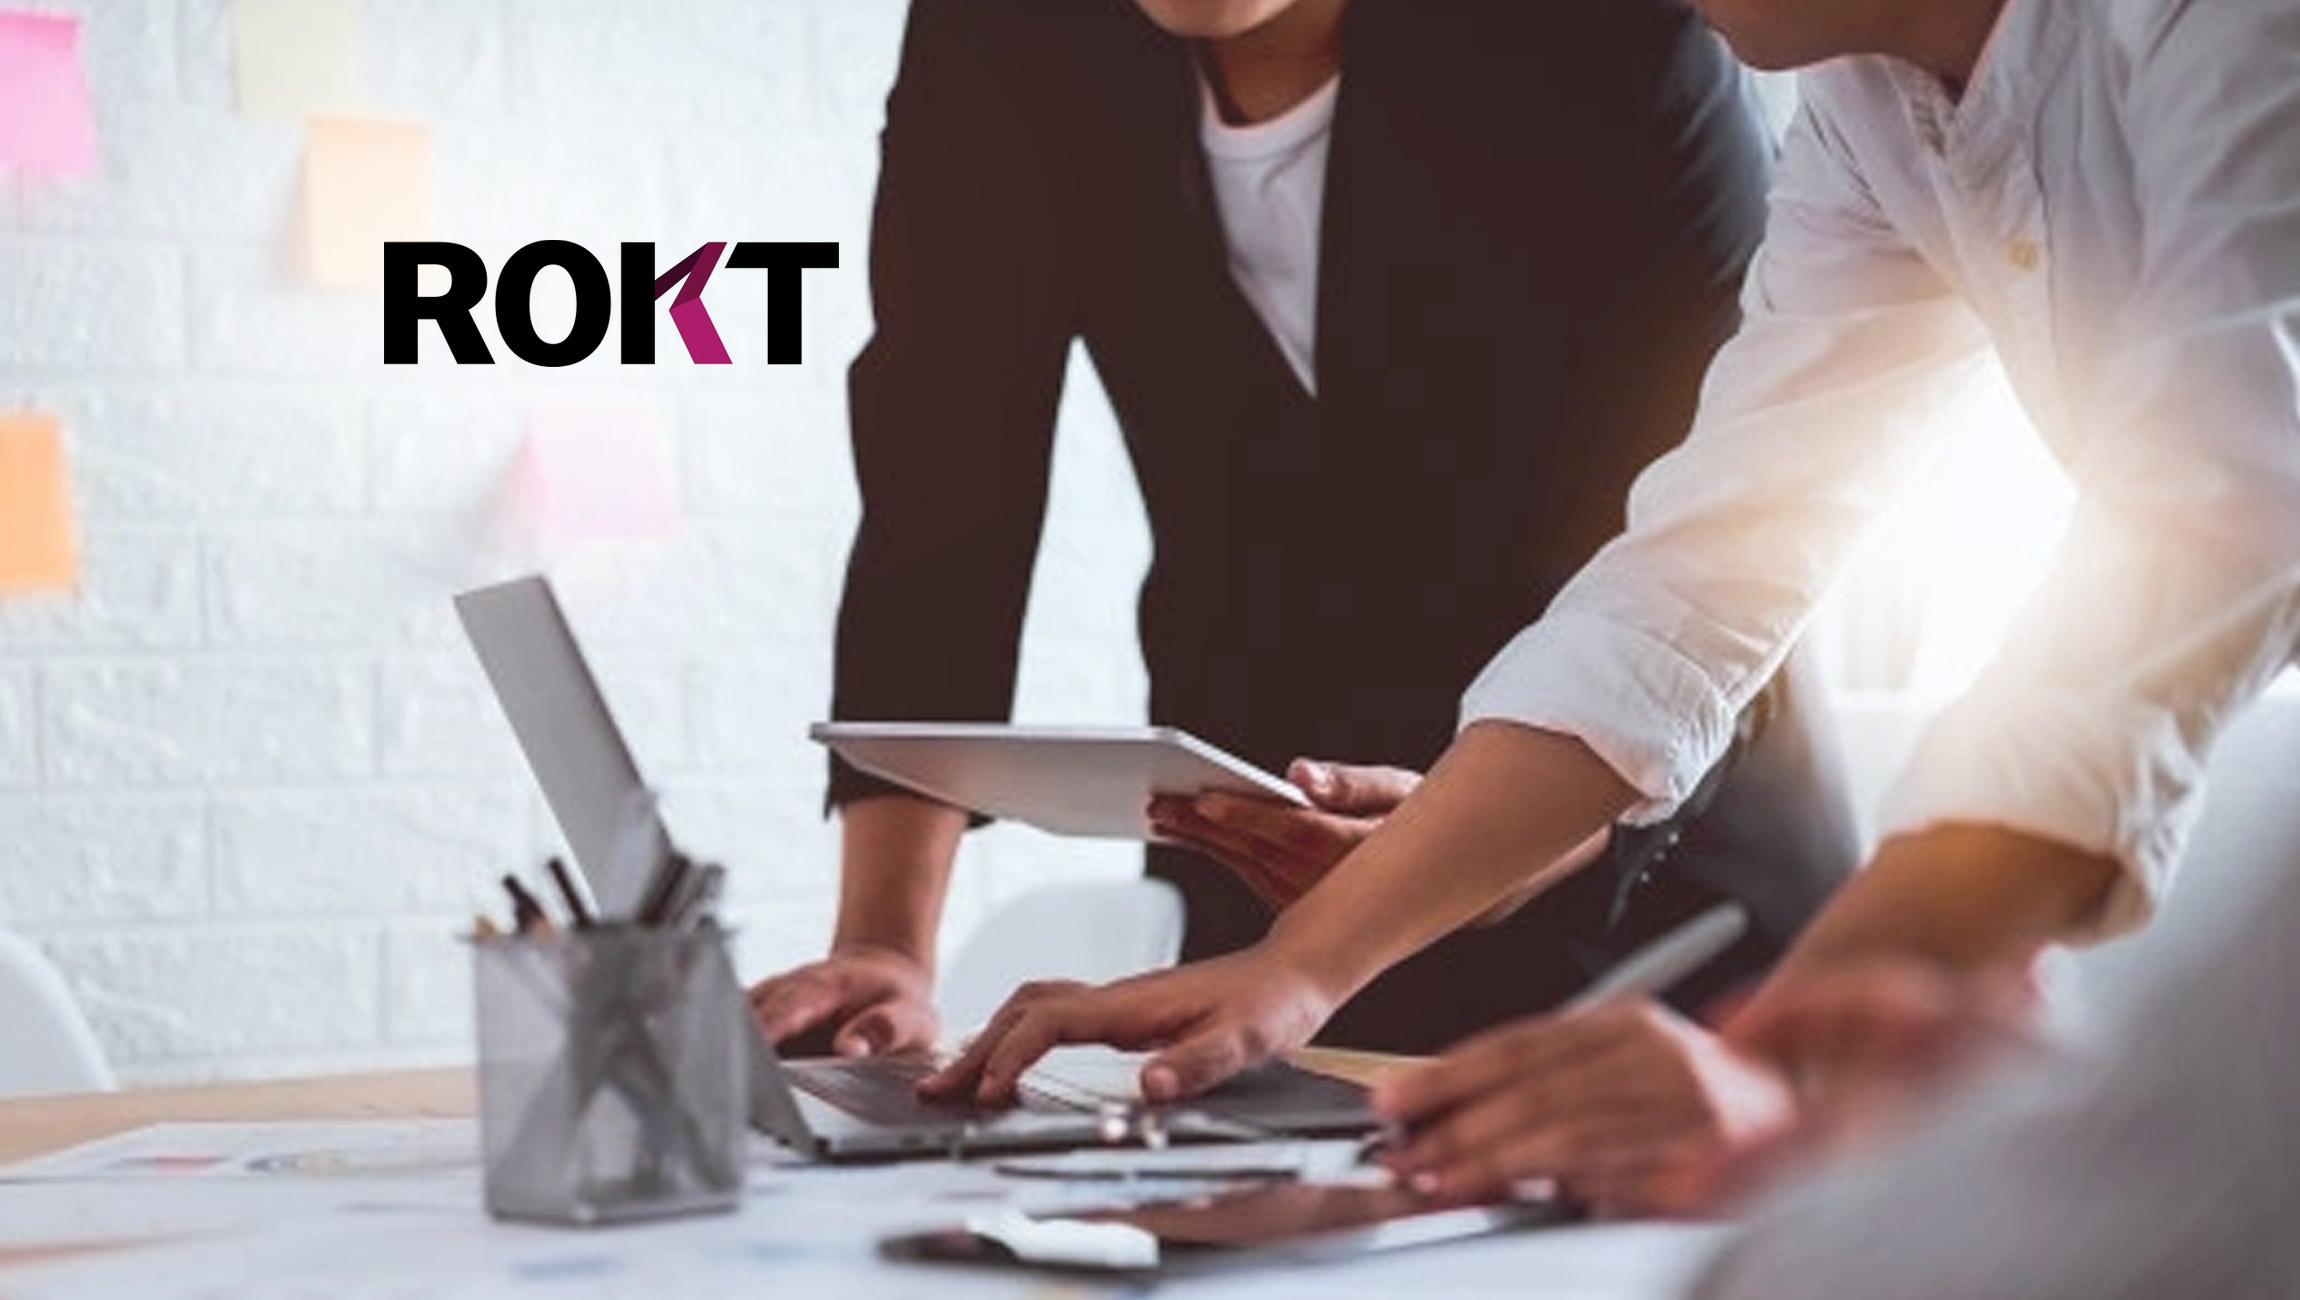 Rokt Names Former Amazon Executive Bill Barton as Chief Product and Engineering Officer to Lead All R&D